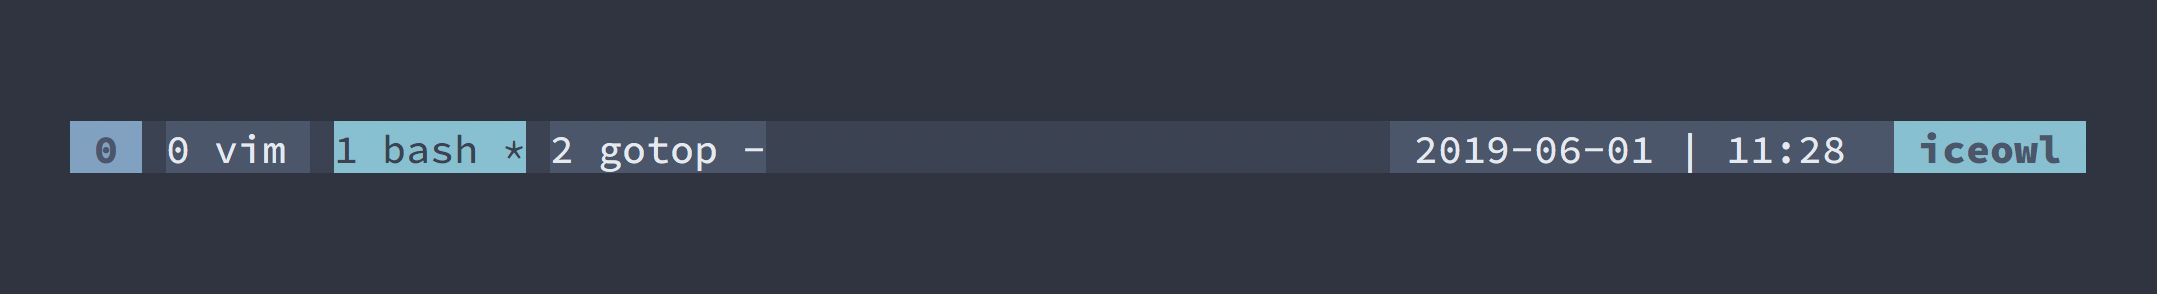 Screenshot showing the tmux status bar without patched font elements